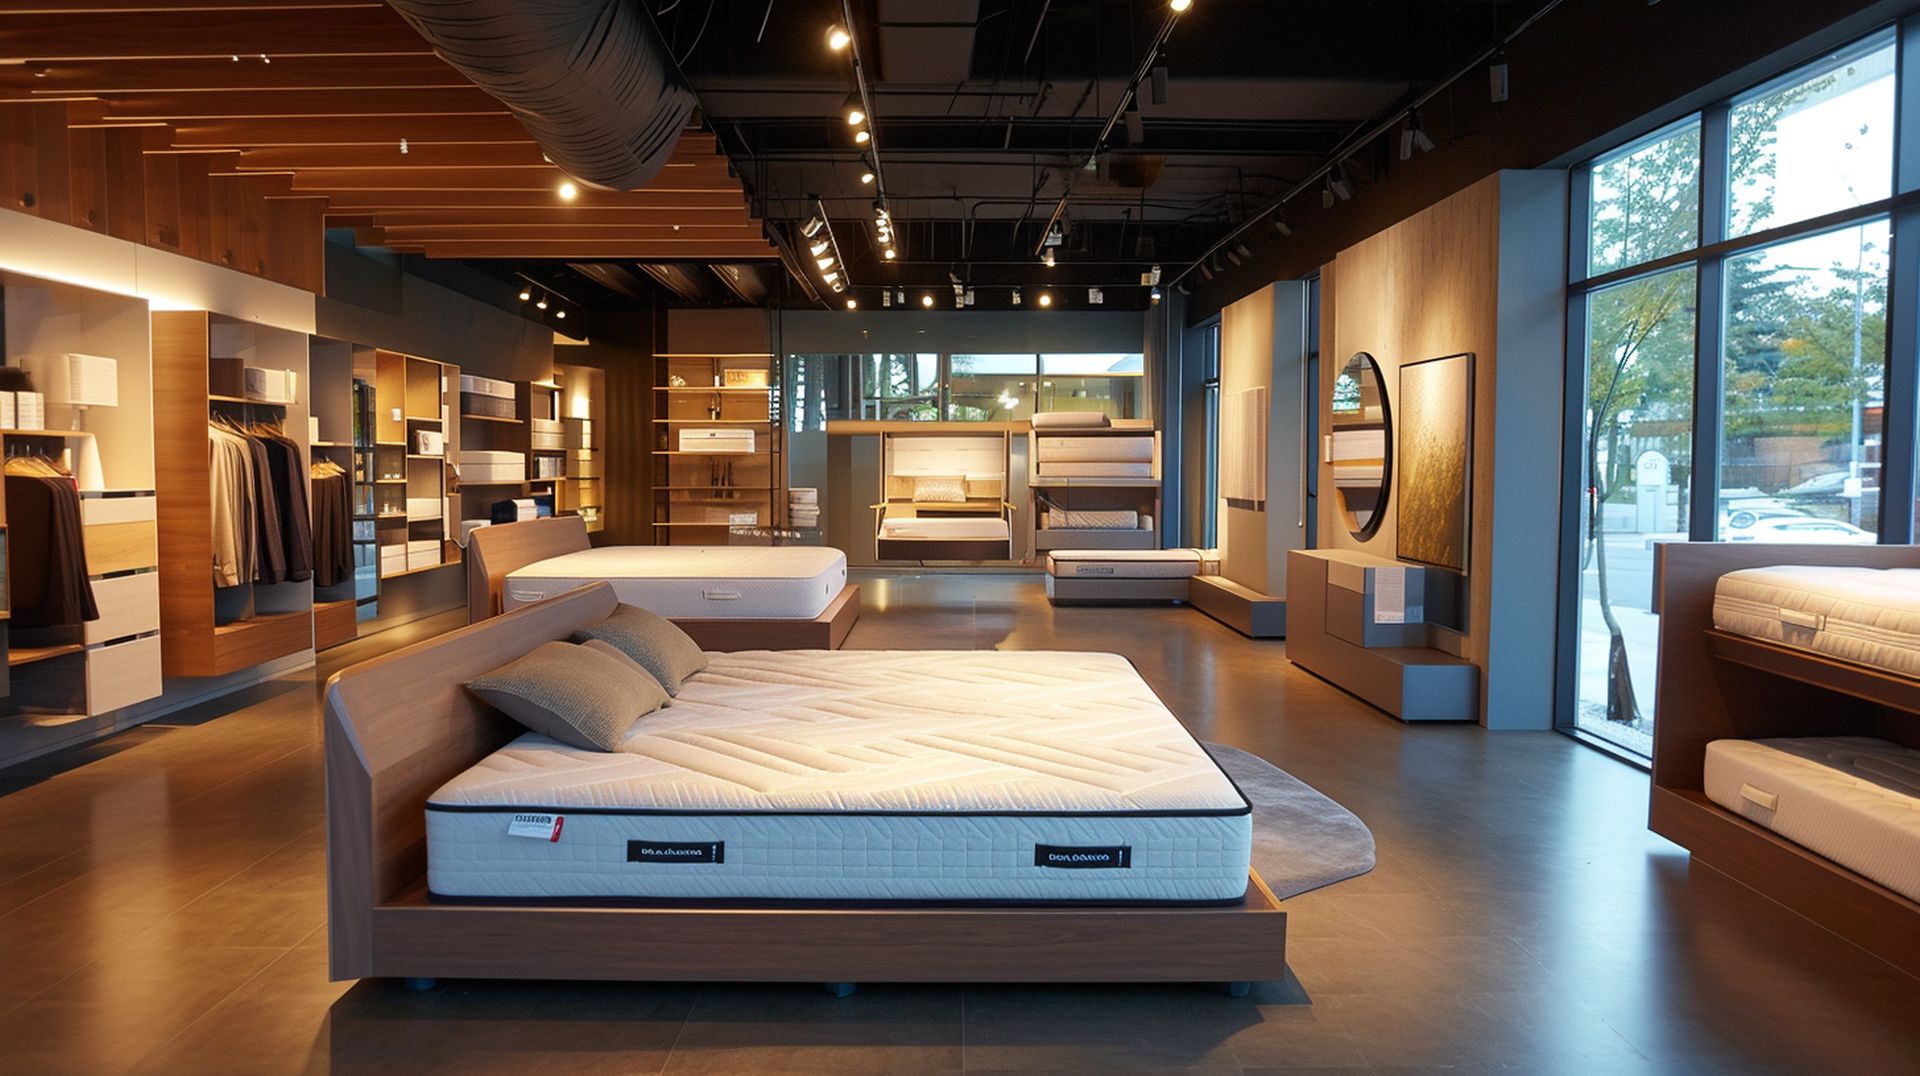 If you're looking for a new bed, mattress stores in Hamden offer the best customer and delivery service, financing, and warranties in Connecticut